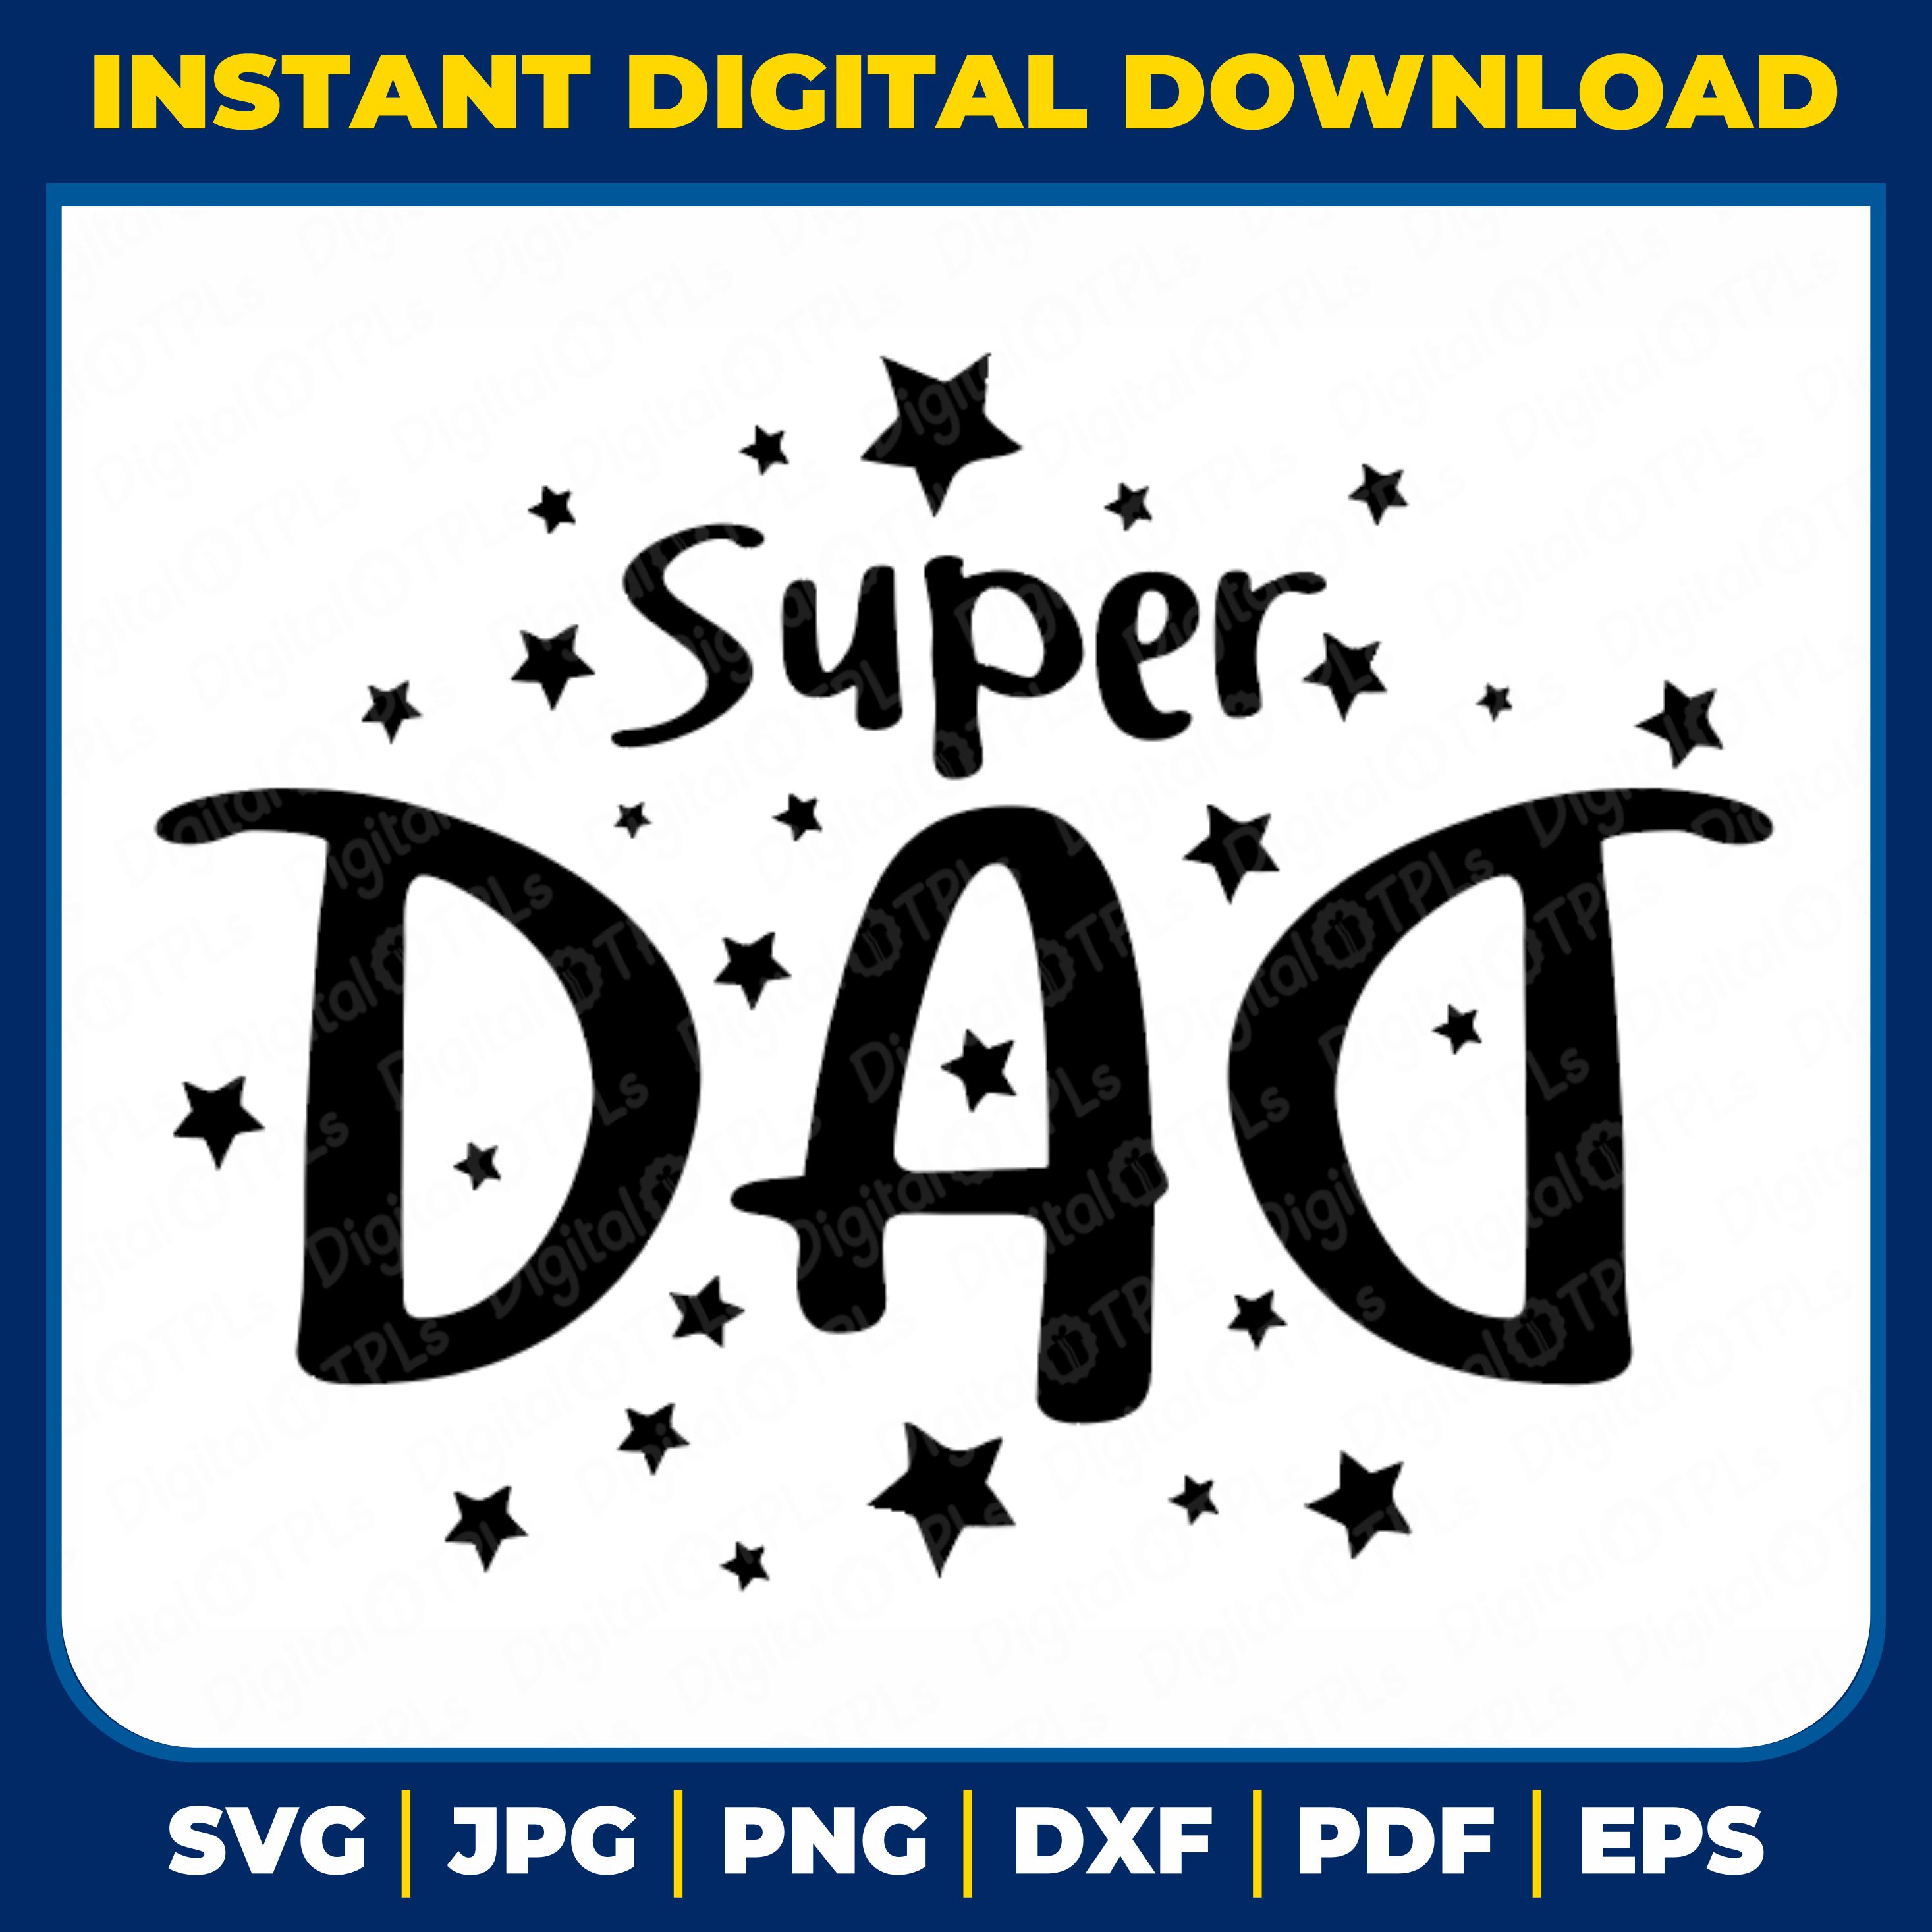 Super Dad SVG | Father's Day SVG, DXF, EPS, JPG, PNG & PDF Files  cover image.